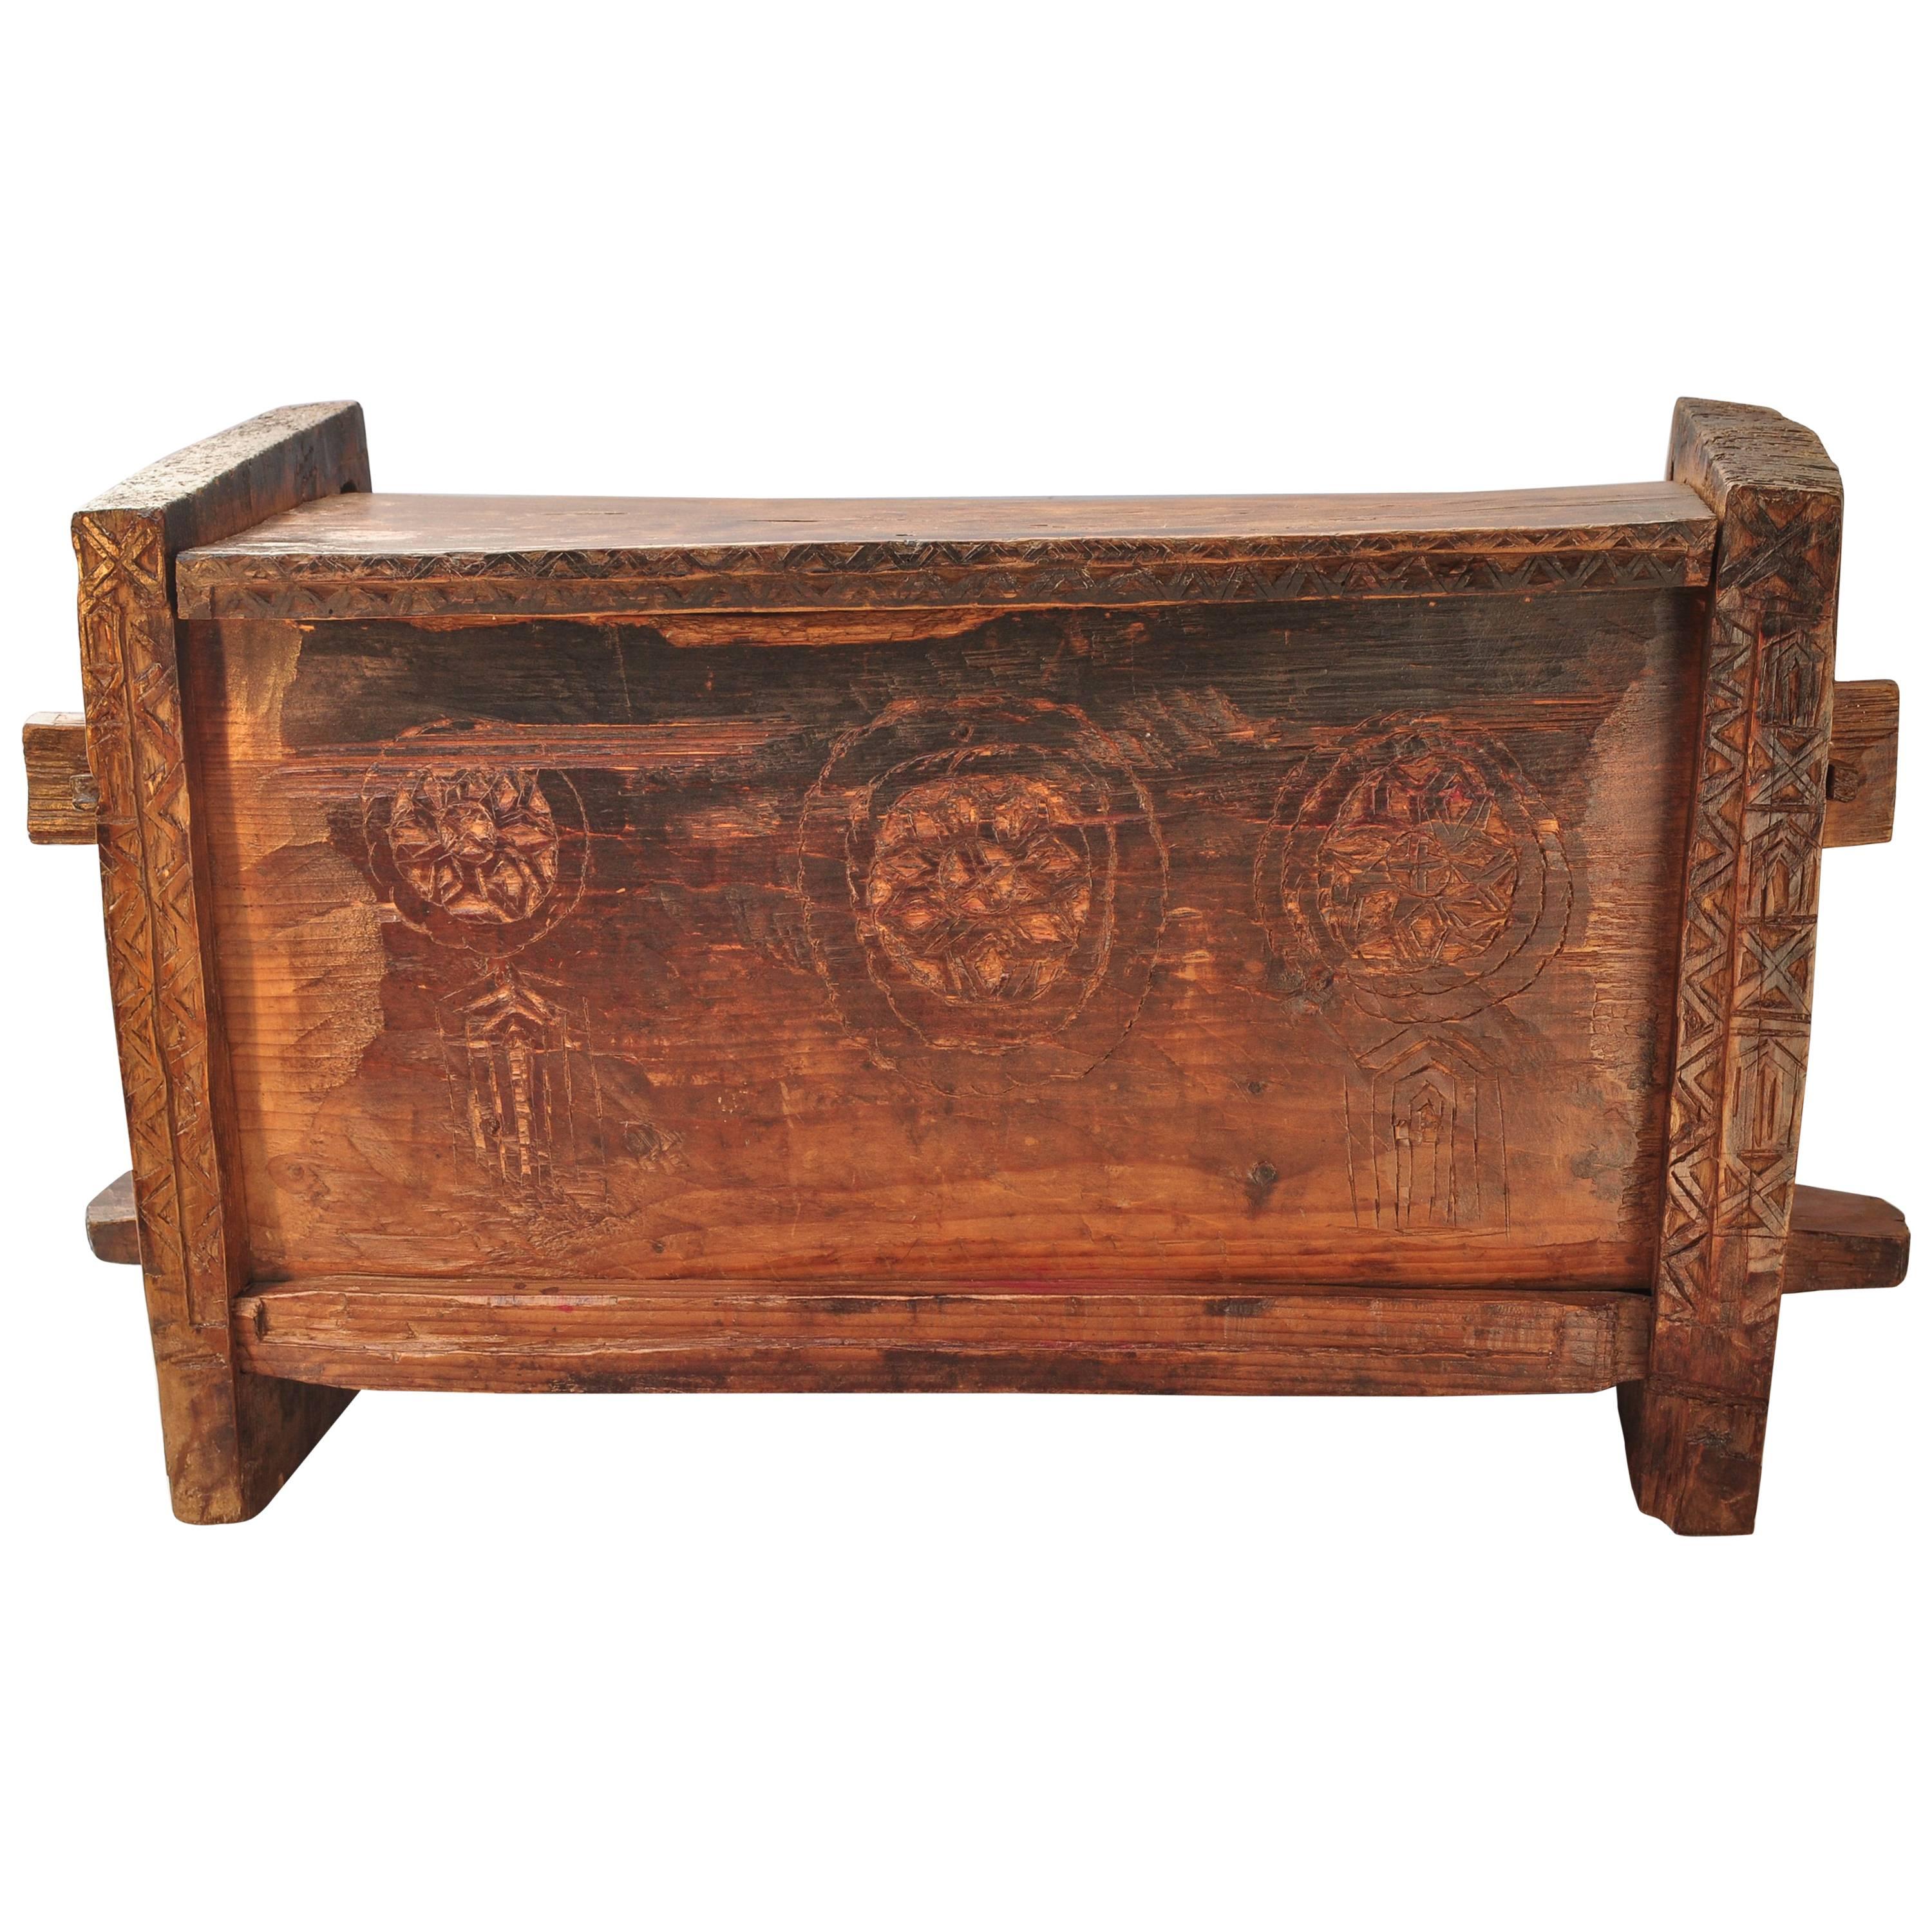 Primitive Hand-Carved Wooden Chest, Raute People of Nepal, Mid-Late 20th Century